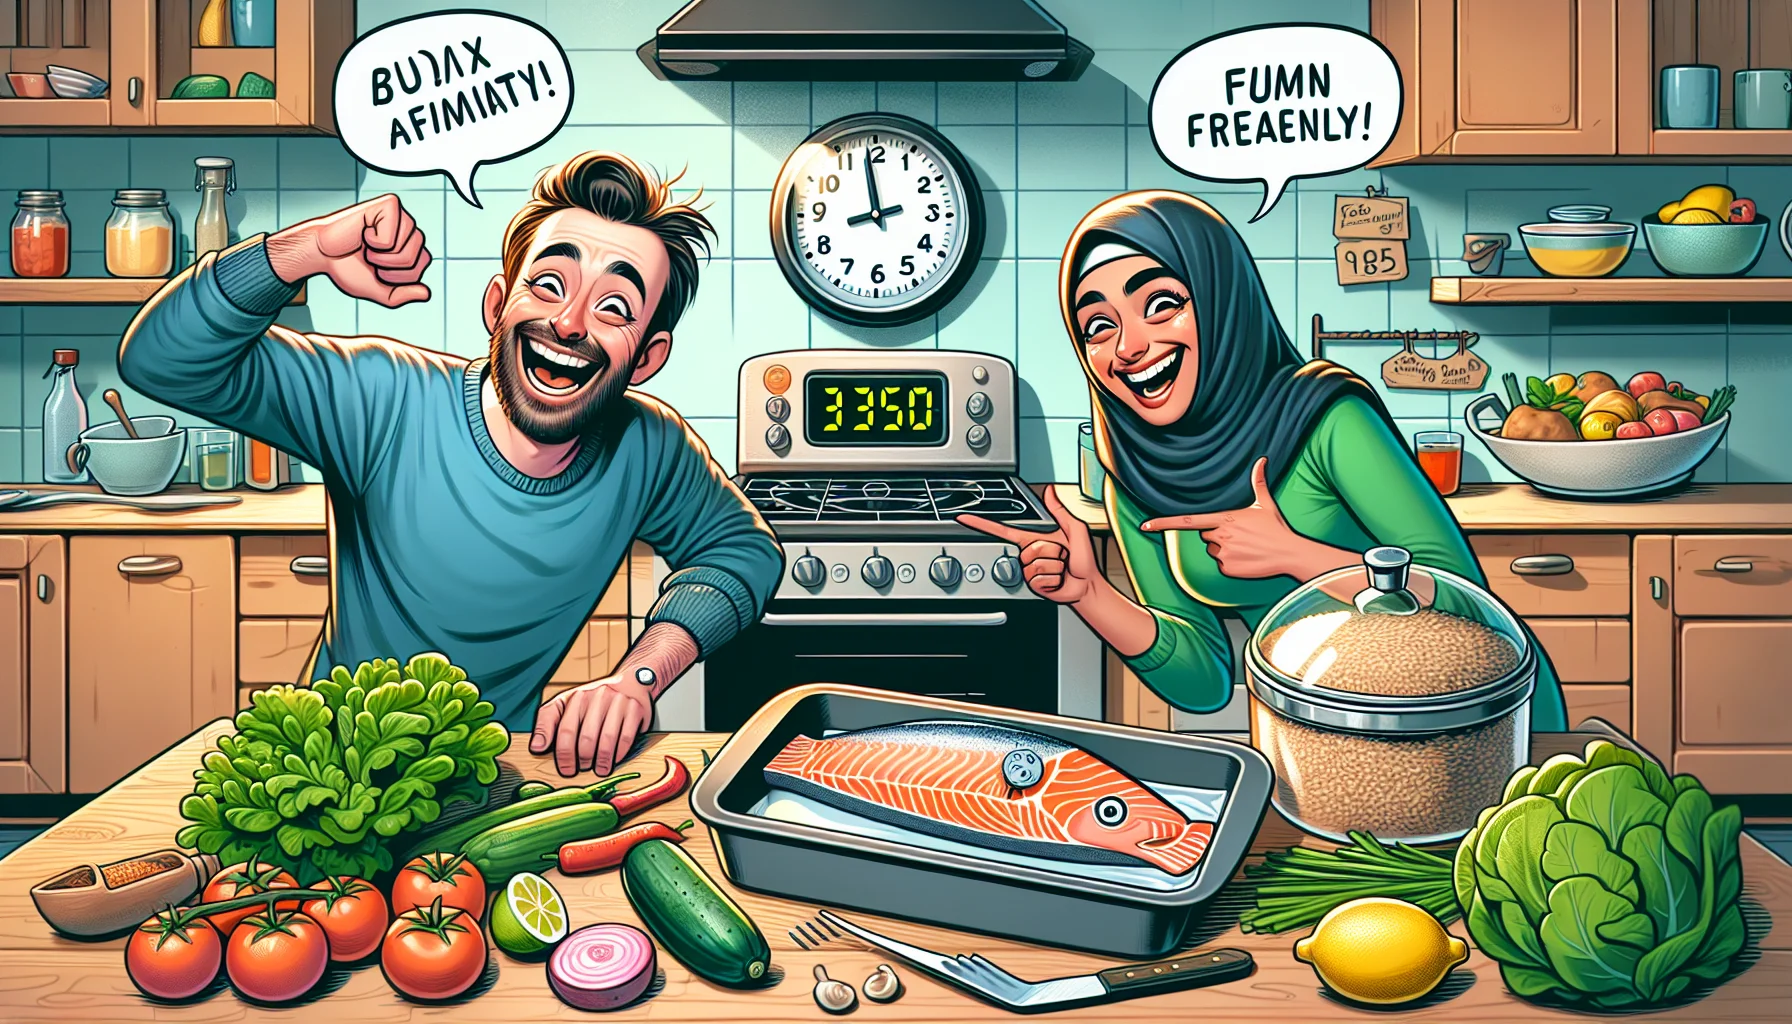 Illustrate an amusing scene set in a homey kitchen filled with cheerful colors. In the foreground, a Caucasian man and a Middle-Eastern woman are laughing heartily while pointing at a salmon in a baking pan and a large oven clock showing '375', indicating the temperature for salmon baking. They are surrounded by various budget-friendly, health-conscious ingredients like fresh greens, tomatoes, lemons, and whole grains. Demonstrating cleverness, a cartoon-like price tag hangs on the fish signifying affordability. The mood should emphasize the fun and monetary benefits of home cooking and healthy eating.